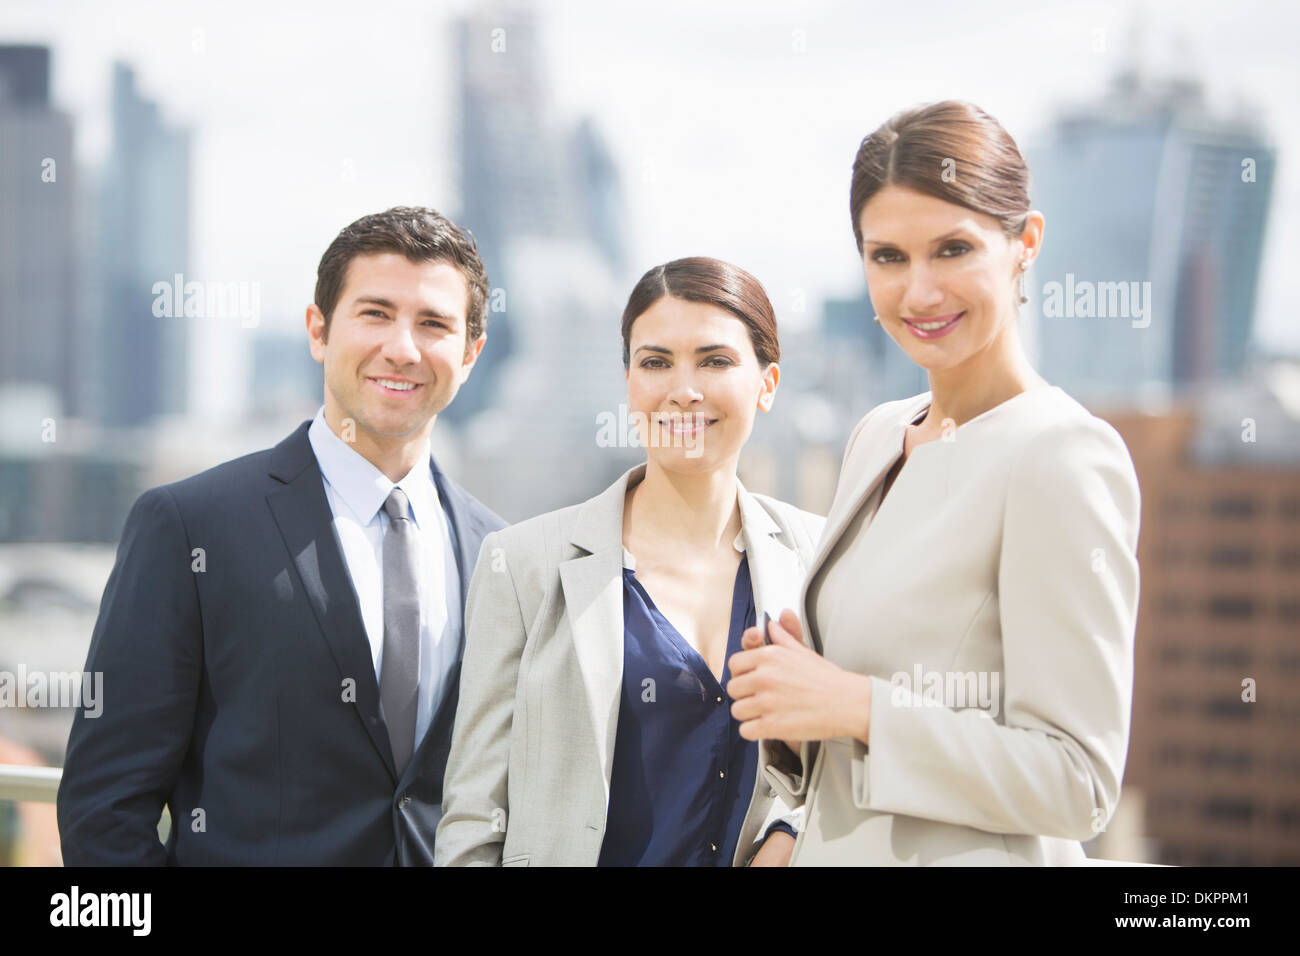 Business people smiling outdoors Banque D'Images